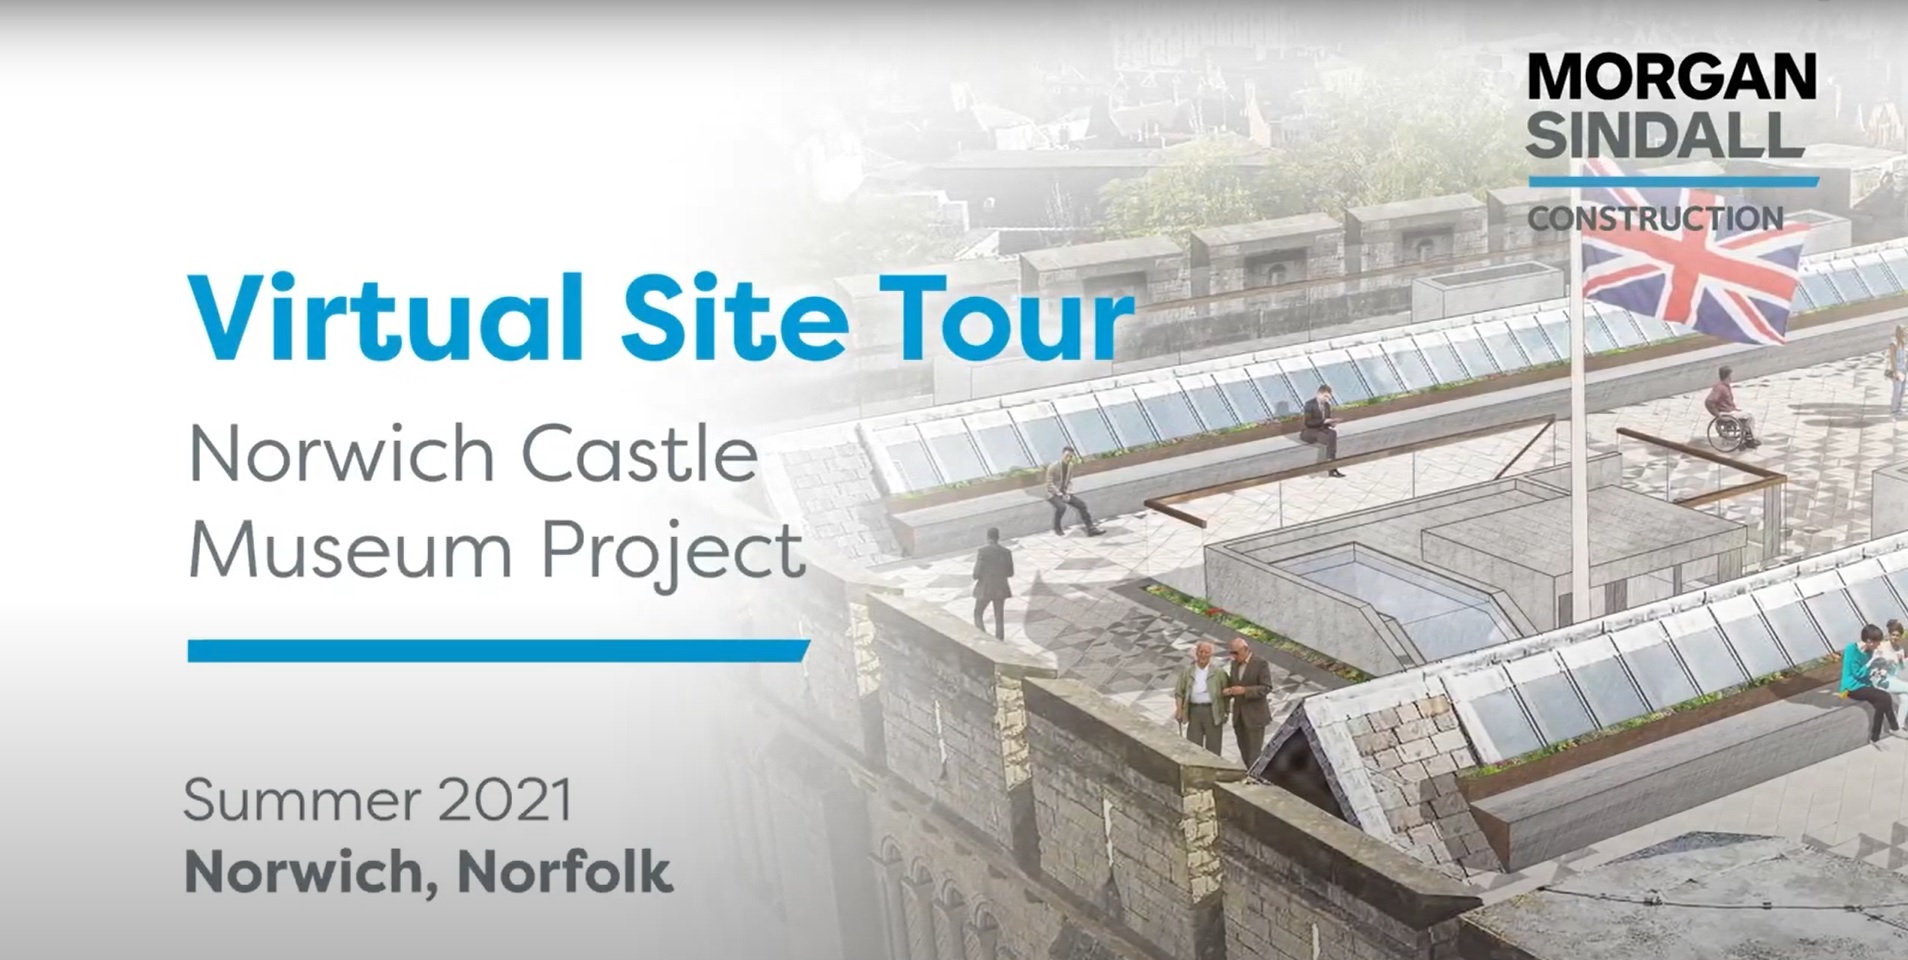 Virtual Tour of Norwich Castle with Morgan Sindall